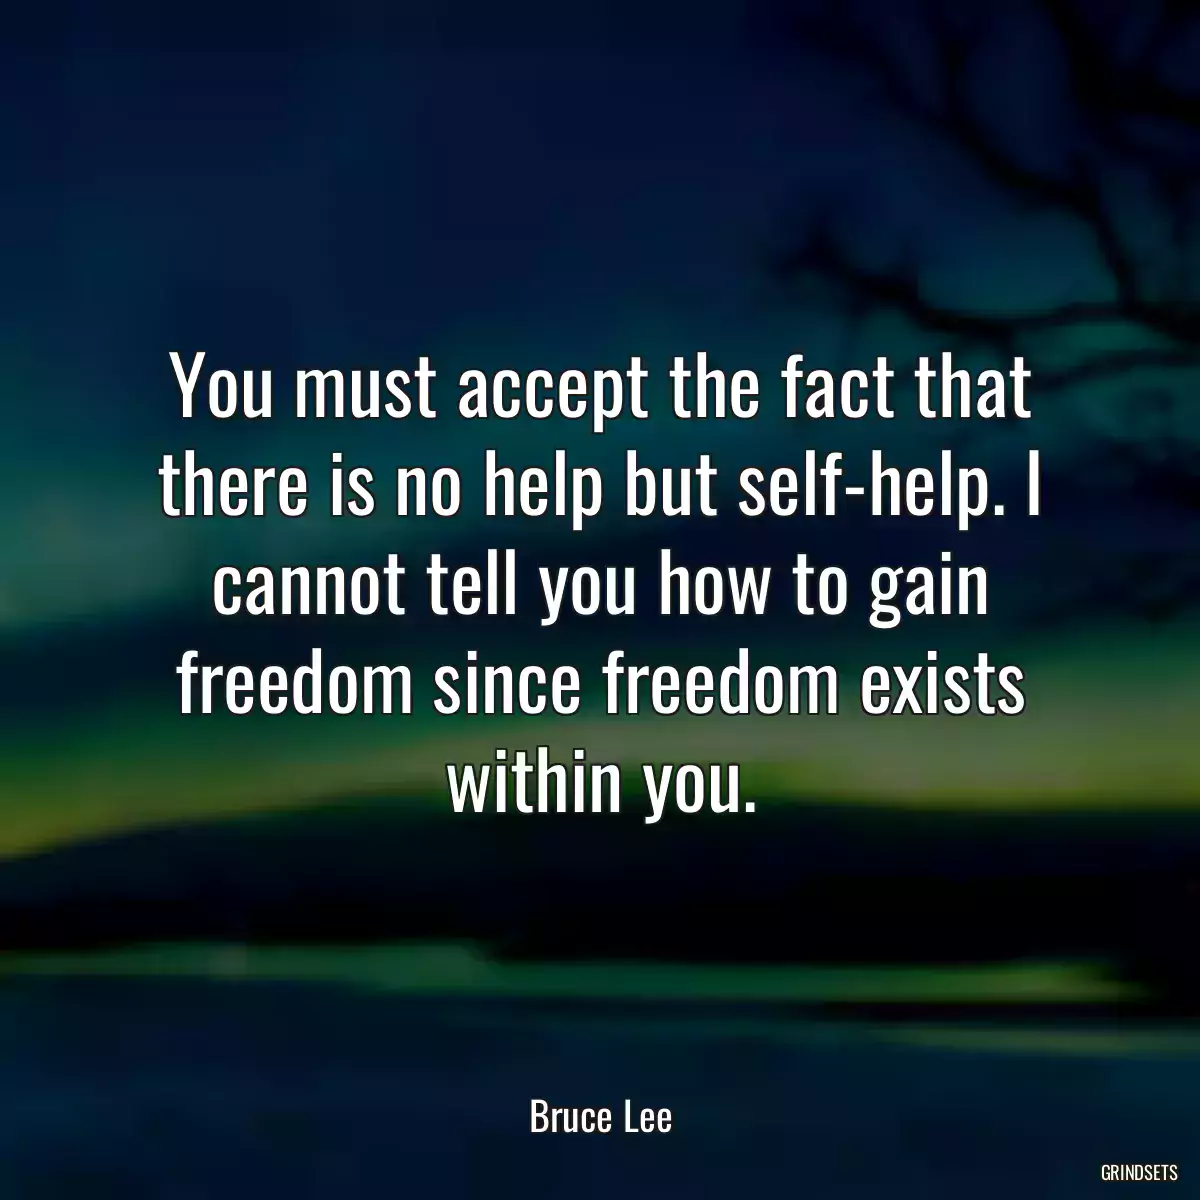 You must accept the fact that there is no help but self-help. I cannot tell you how to gain freedom since freedom exists within you.